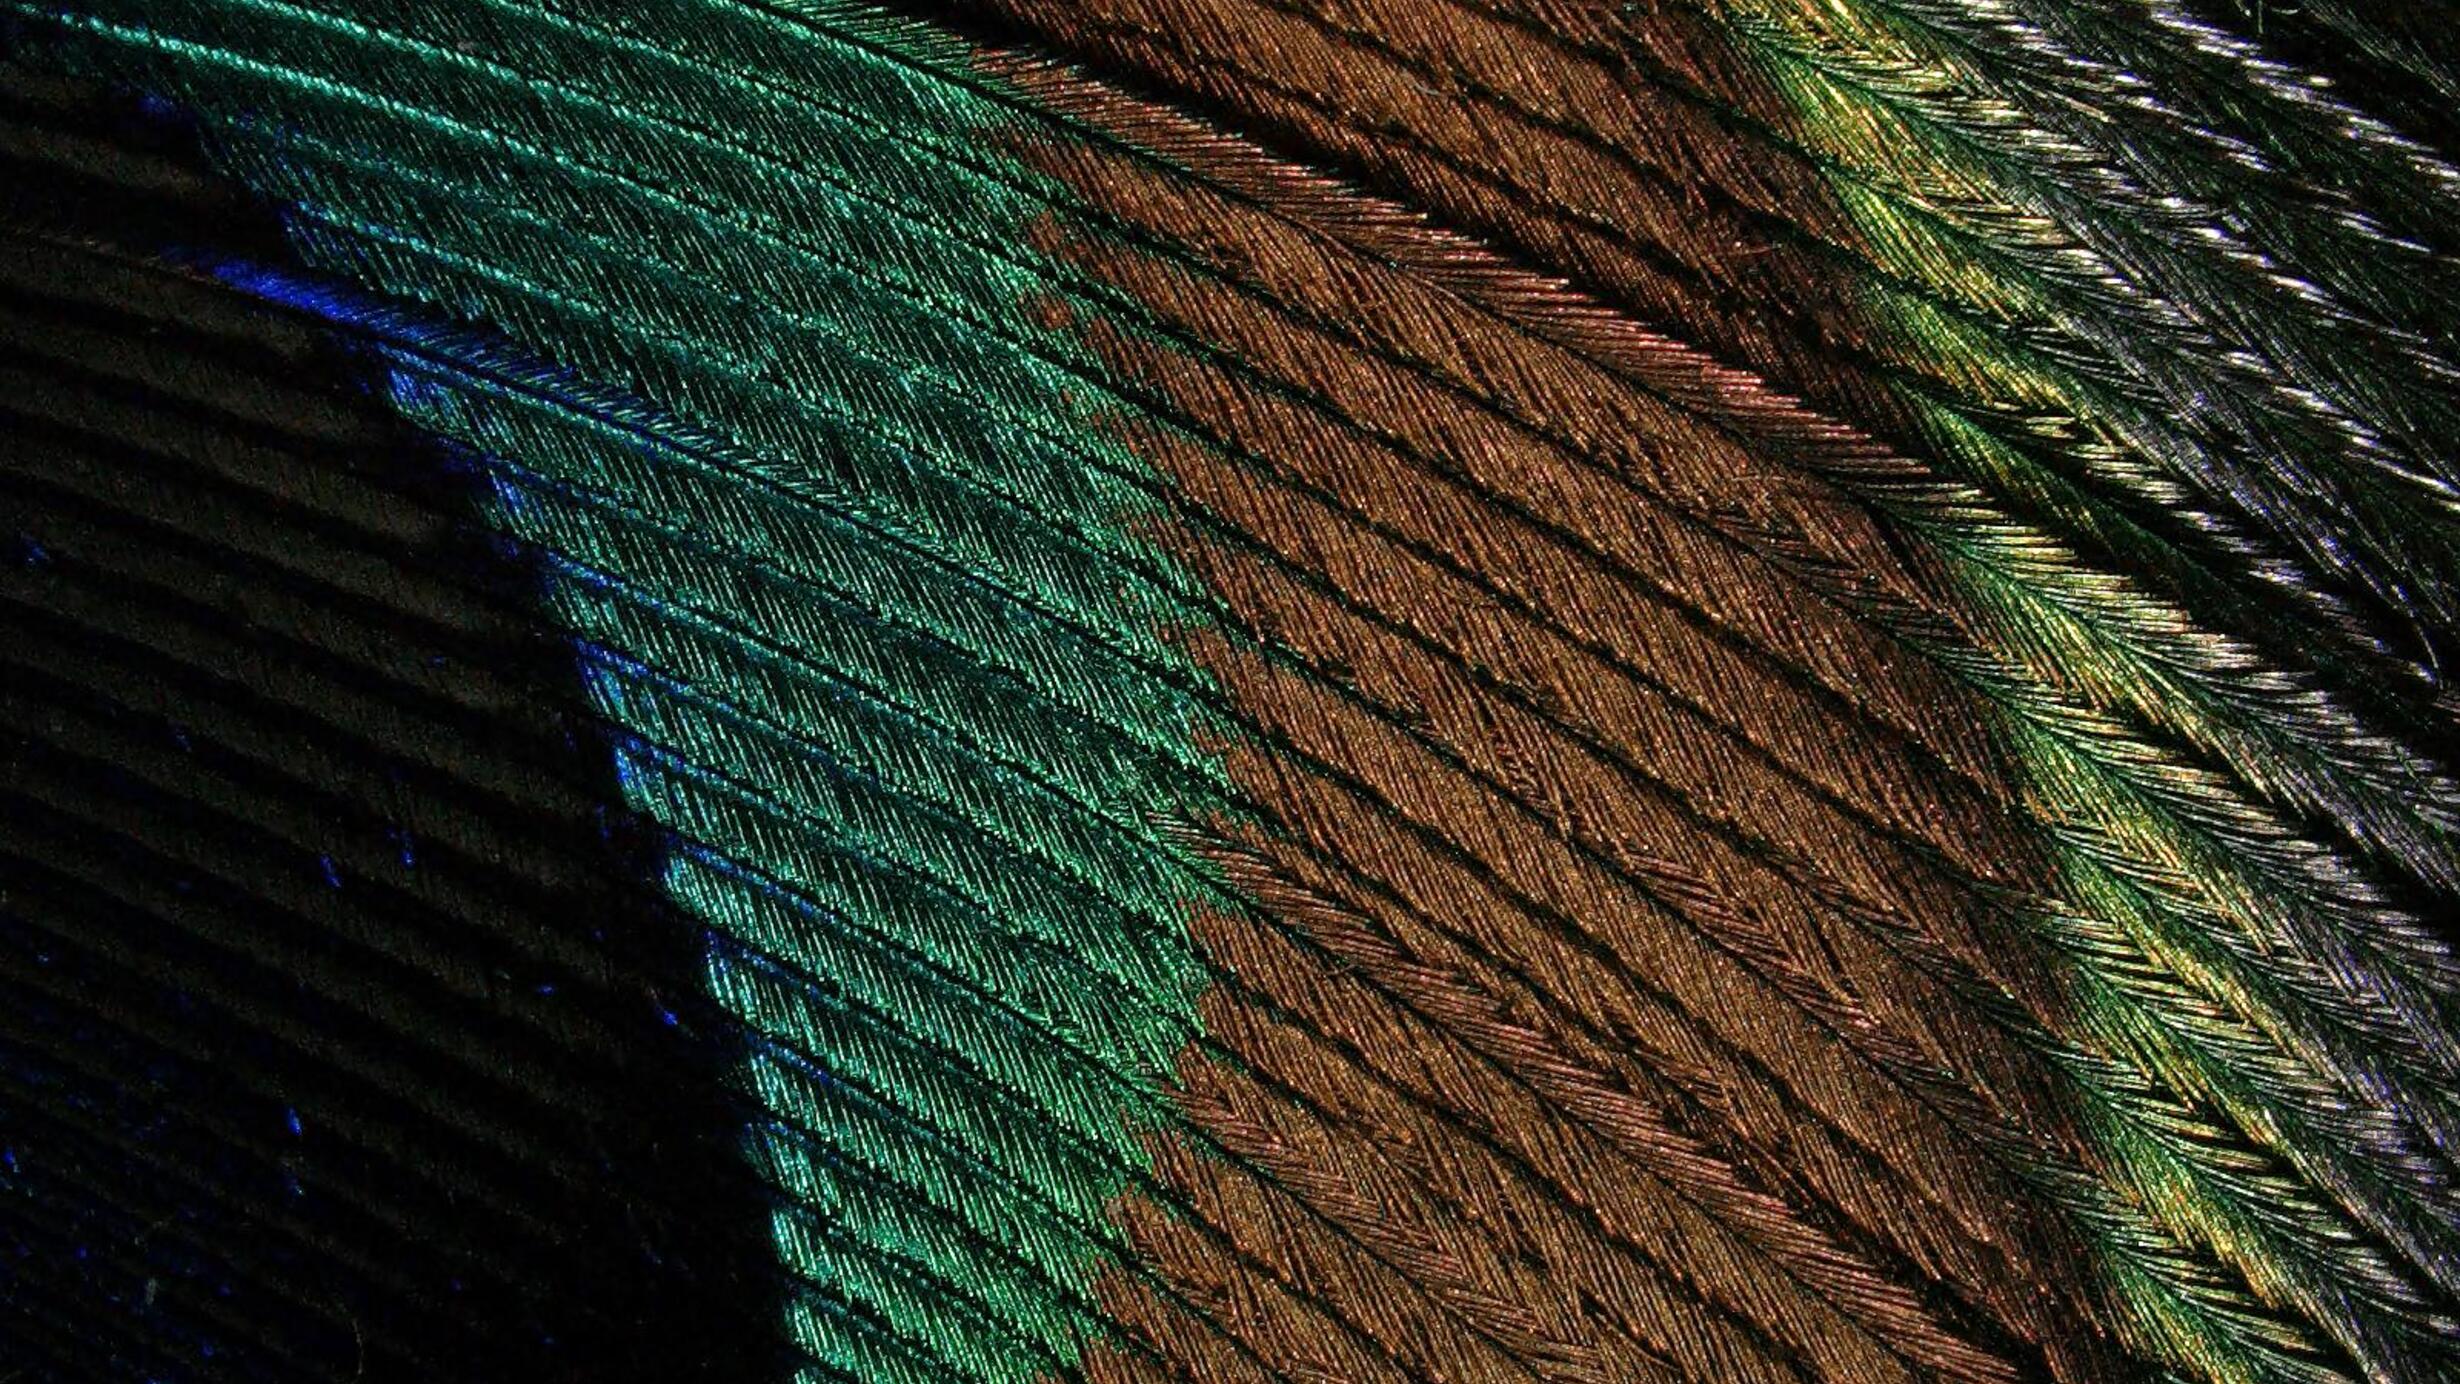 A magnified image of a peacock feather showing green, orange, and yellow striping in the gently curved barbs with iridescent barbules.